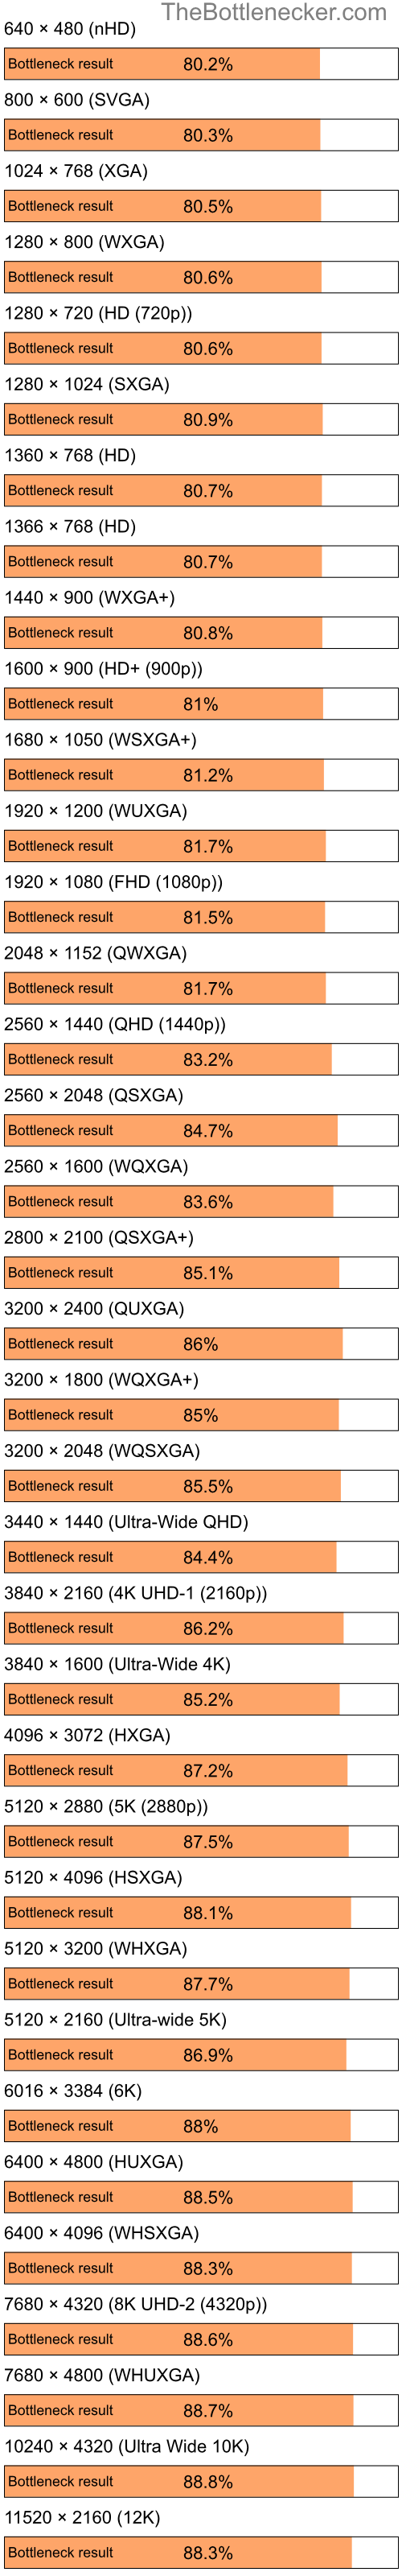 Bottleneck results by resolution for Intel Celeron M 410 and NVIDIA GeForce 6500 in Graphic Card Intense Tasks